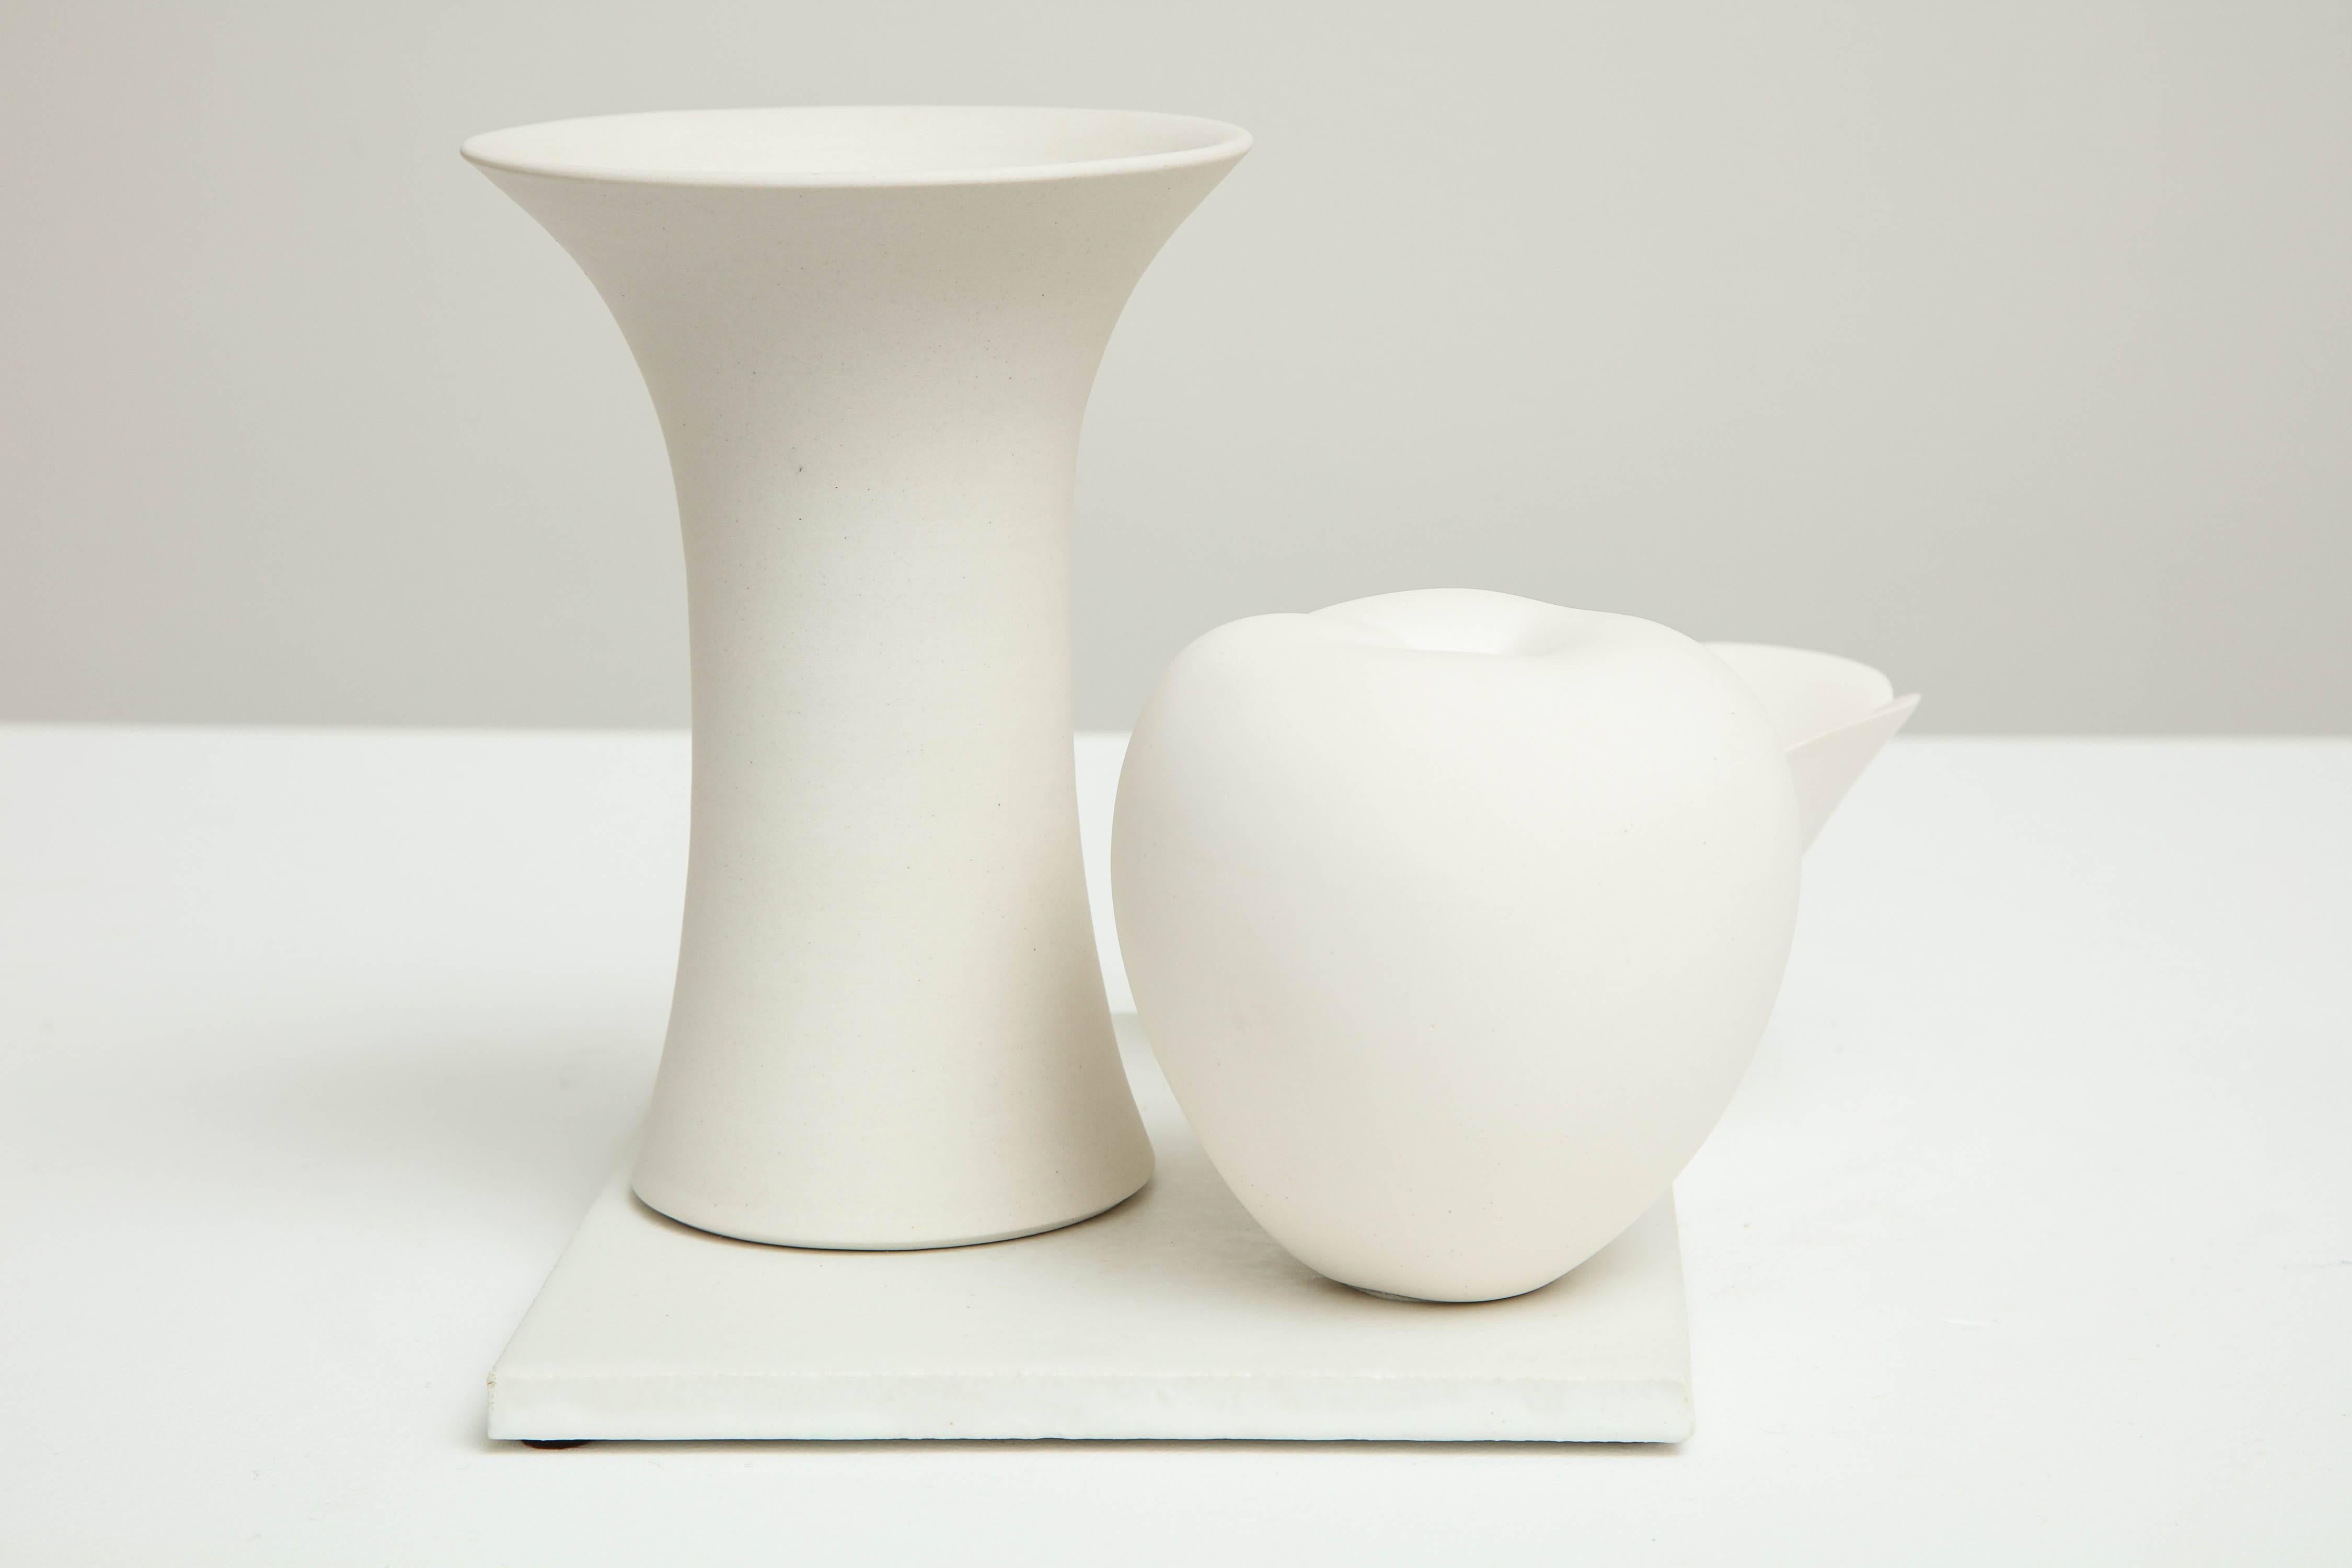 Porcelain Still Life in White with Apple, Floral Bowl and Tall Footed Bowl, 2017